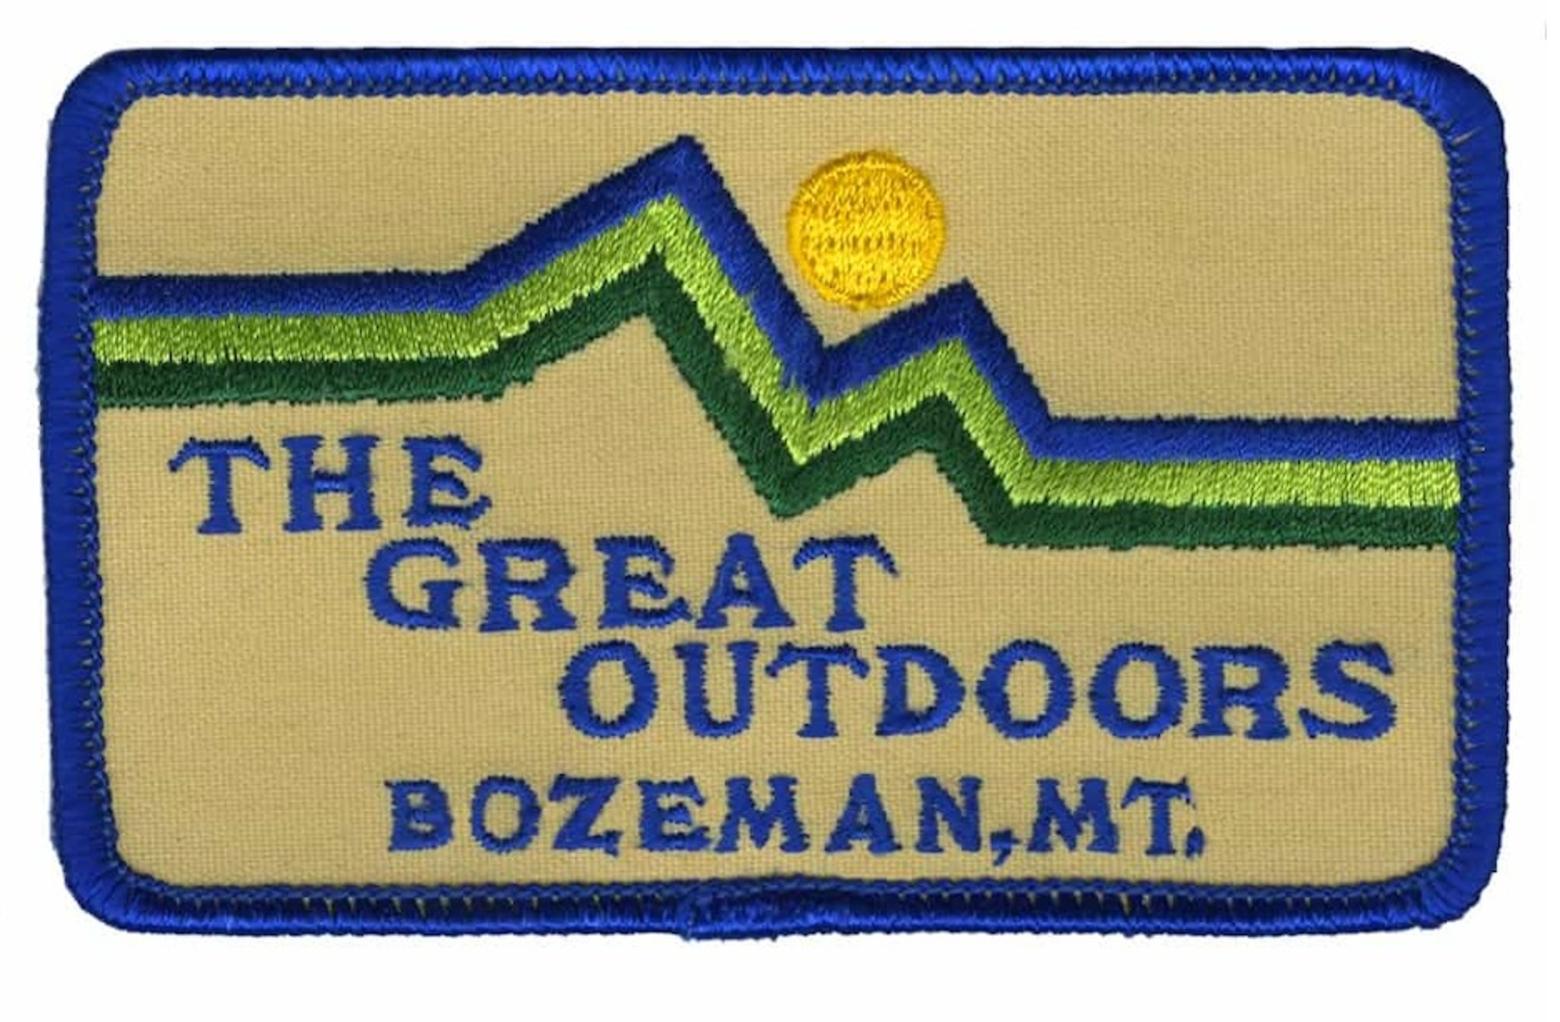 A popular patch, sold at Bridger Bowl, that locals in Bozeman proudly sewed onto their ski jackets in the days when Bridger's mystique was as one of the best local quaint ski hills in America.  In recent years, many longtime supporters of Bridger have expressed alarm as ticket prices have increased and it has moved to expand, in turn fueling more development and traffic in Bridger Canyon.  Not long ago the following wording was proposed for dropping from Bridger's corporate bylaws: "The object of the corportion shall be to provide out-standing skiing and snowboard: First to the residents of Gallatin County; second to the citizens of the State of Montana; and, third, to areas out-side Montana, and to do so at the lowest prices consistent with good business practices such as to allow the continued healthy operation of Bridger." The change is interpreted in different ways by different people.  